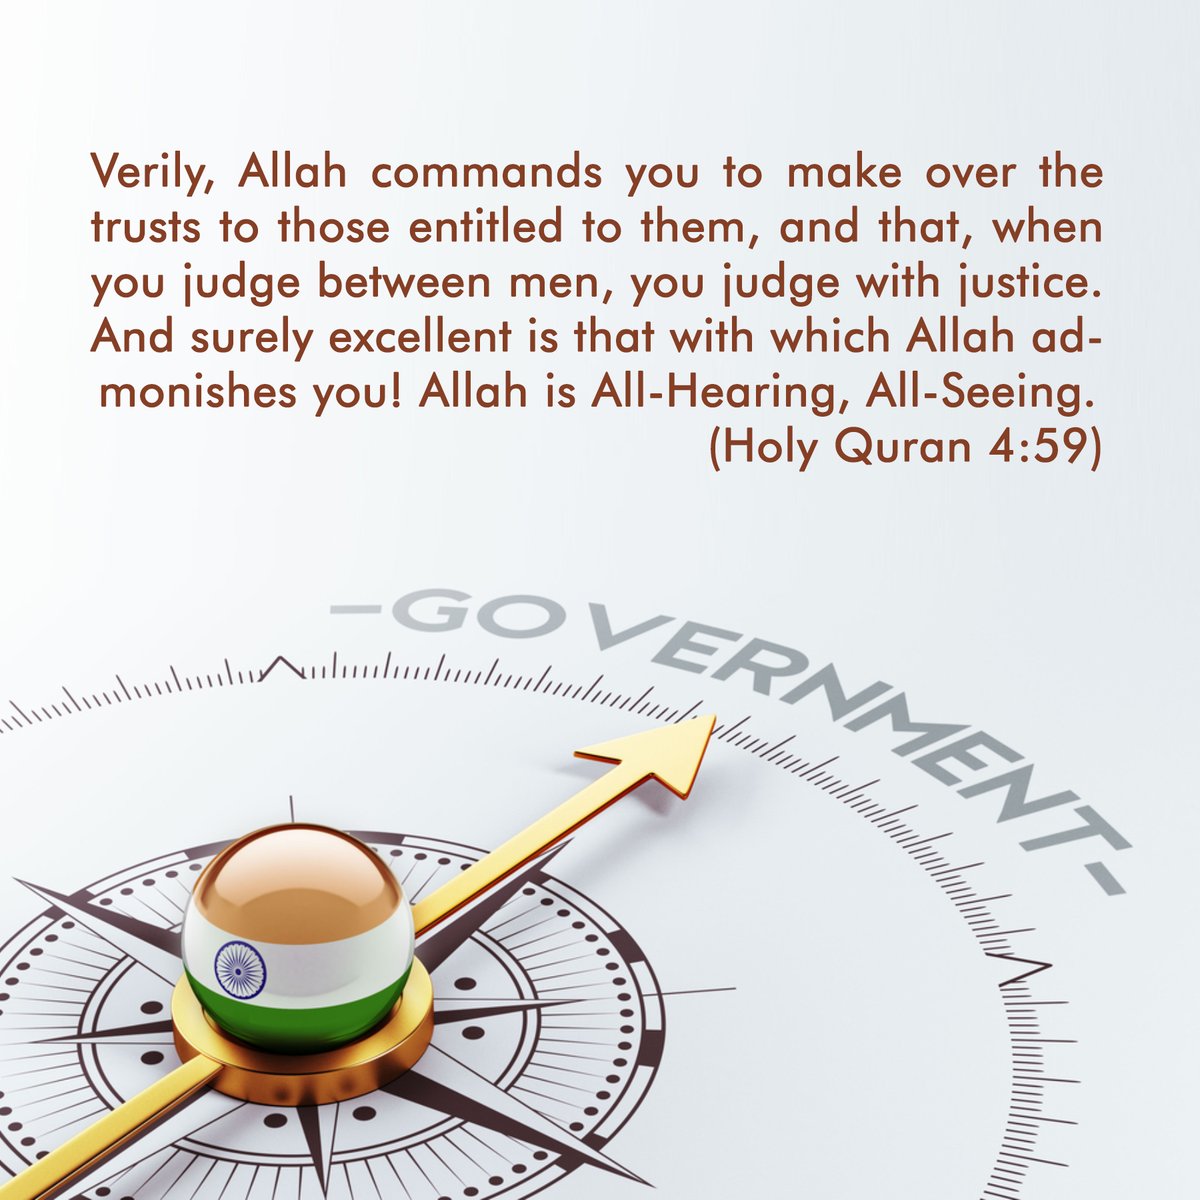 Allah has commanded that trust should handover to those who are entitled, & that when judging between people, we should made decision with justice & honesty.Thus, loyalty to one’s nation requires that thepower of the government should be given to those who are truly entitled.